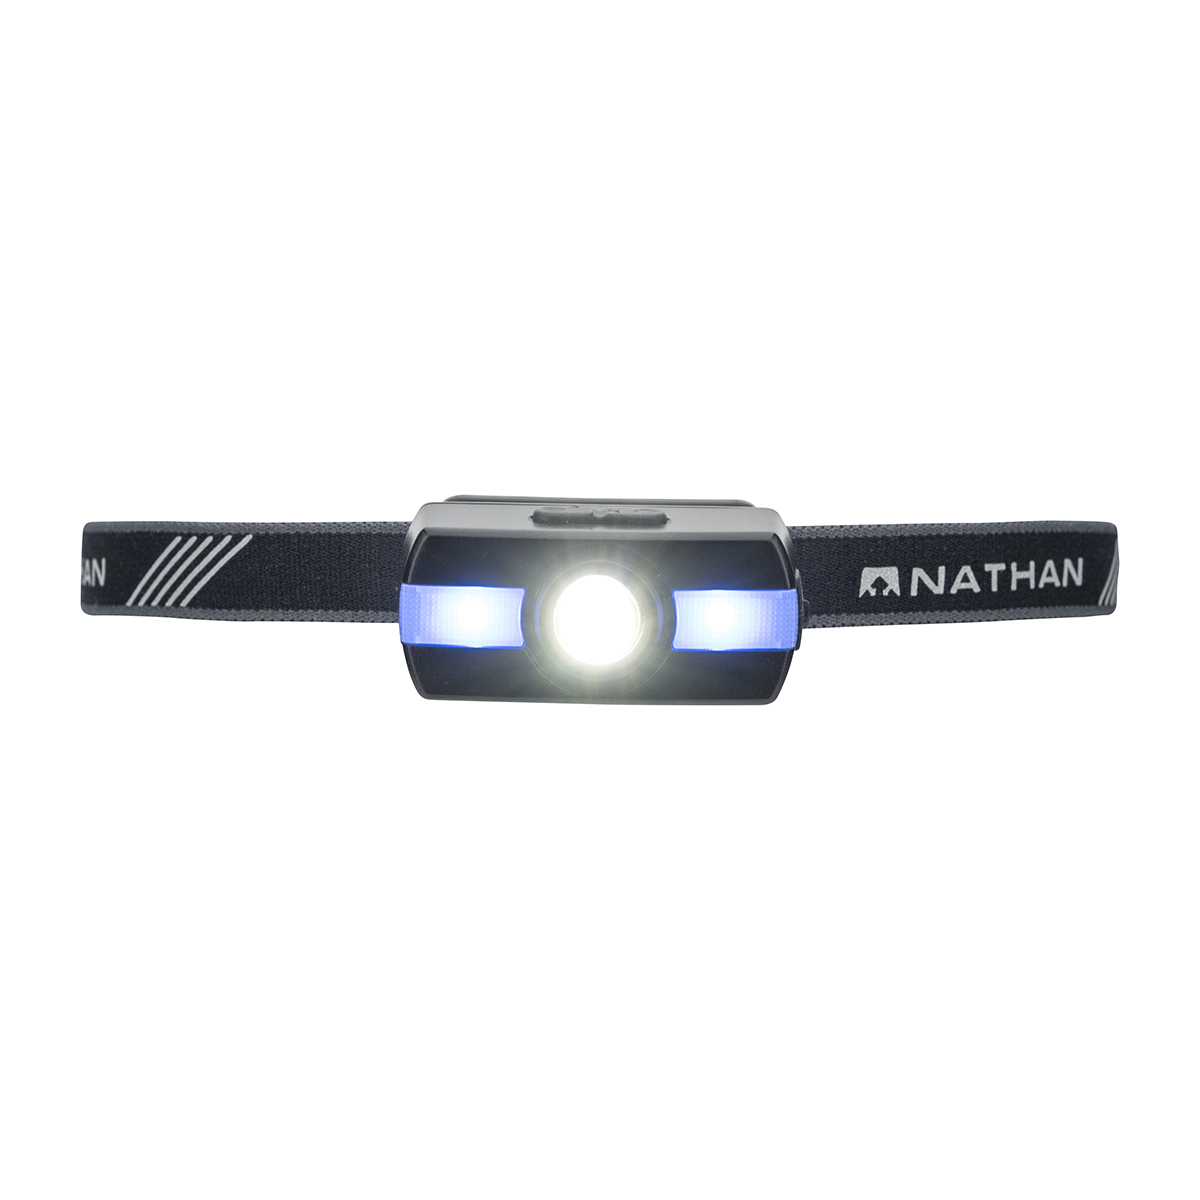 Nathan Neutron Fire RX Runner Headlamp, , large image number null